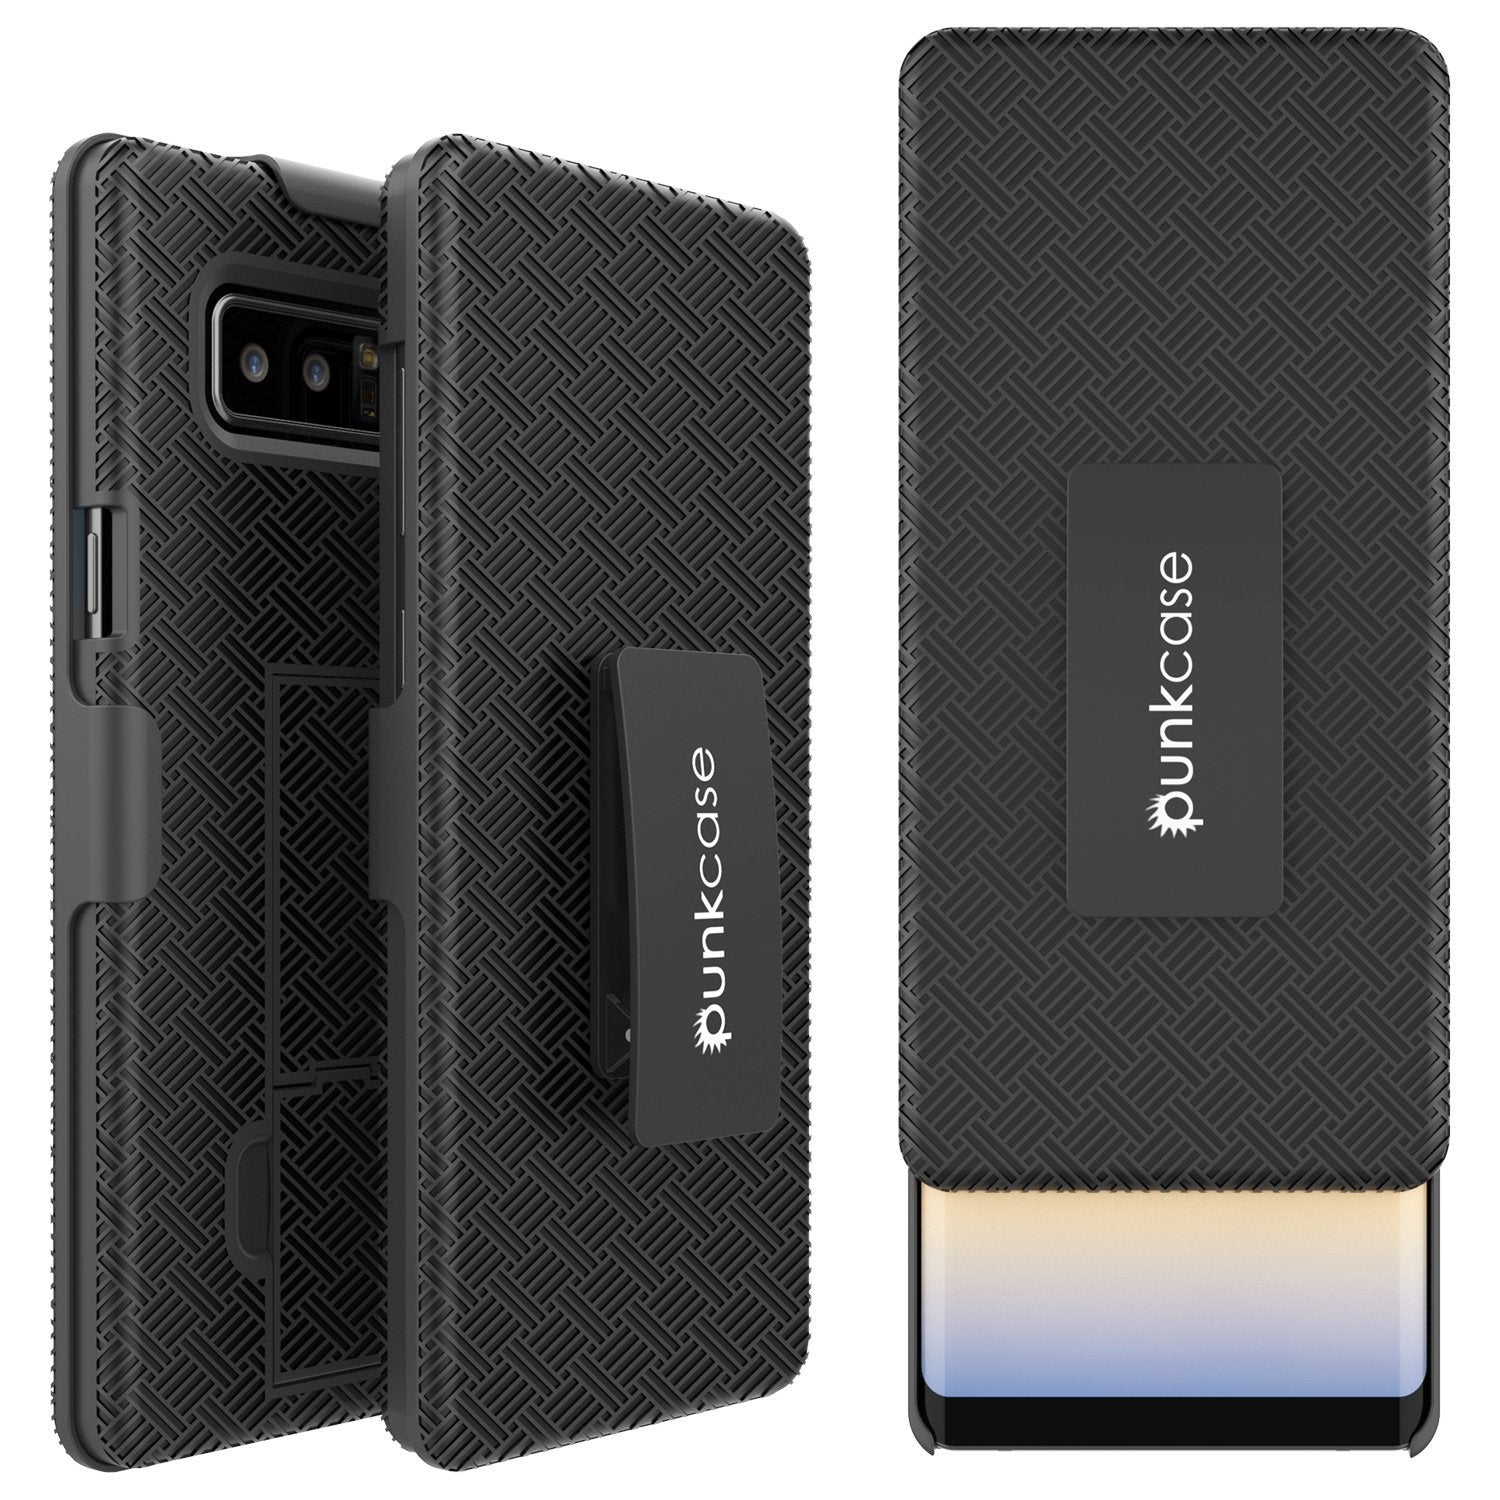 Punkcase Galaxy Note 8 Case, With PunkShield Glass Screen Protector, Holster Belt Clip & Built-In Kickstand Non-Slip Dual Layer Hybrid TPU Full Body Protection for Samsung Note 8 [Black] - PunkCase NZ